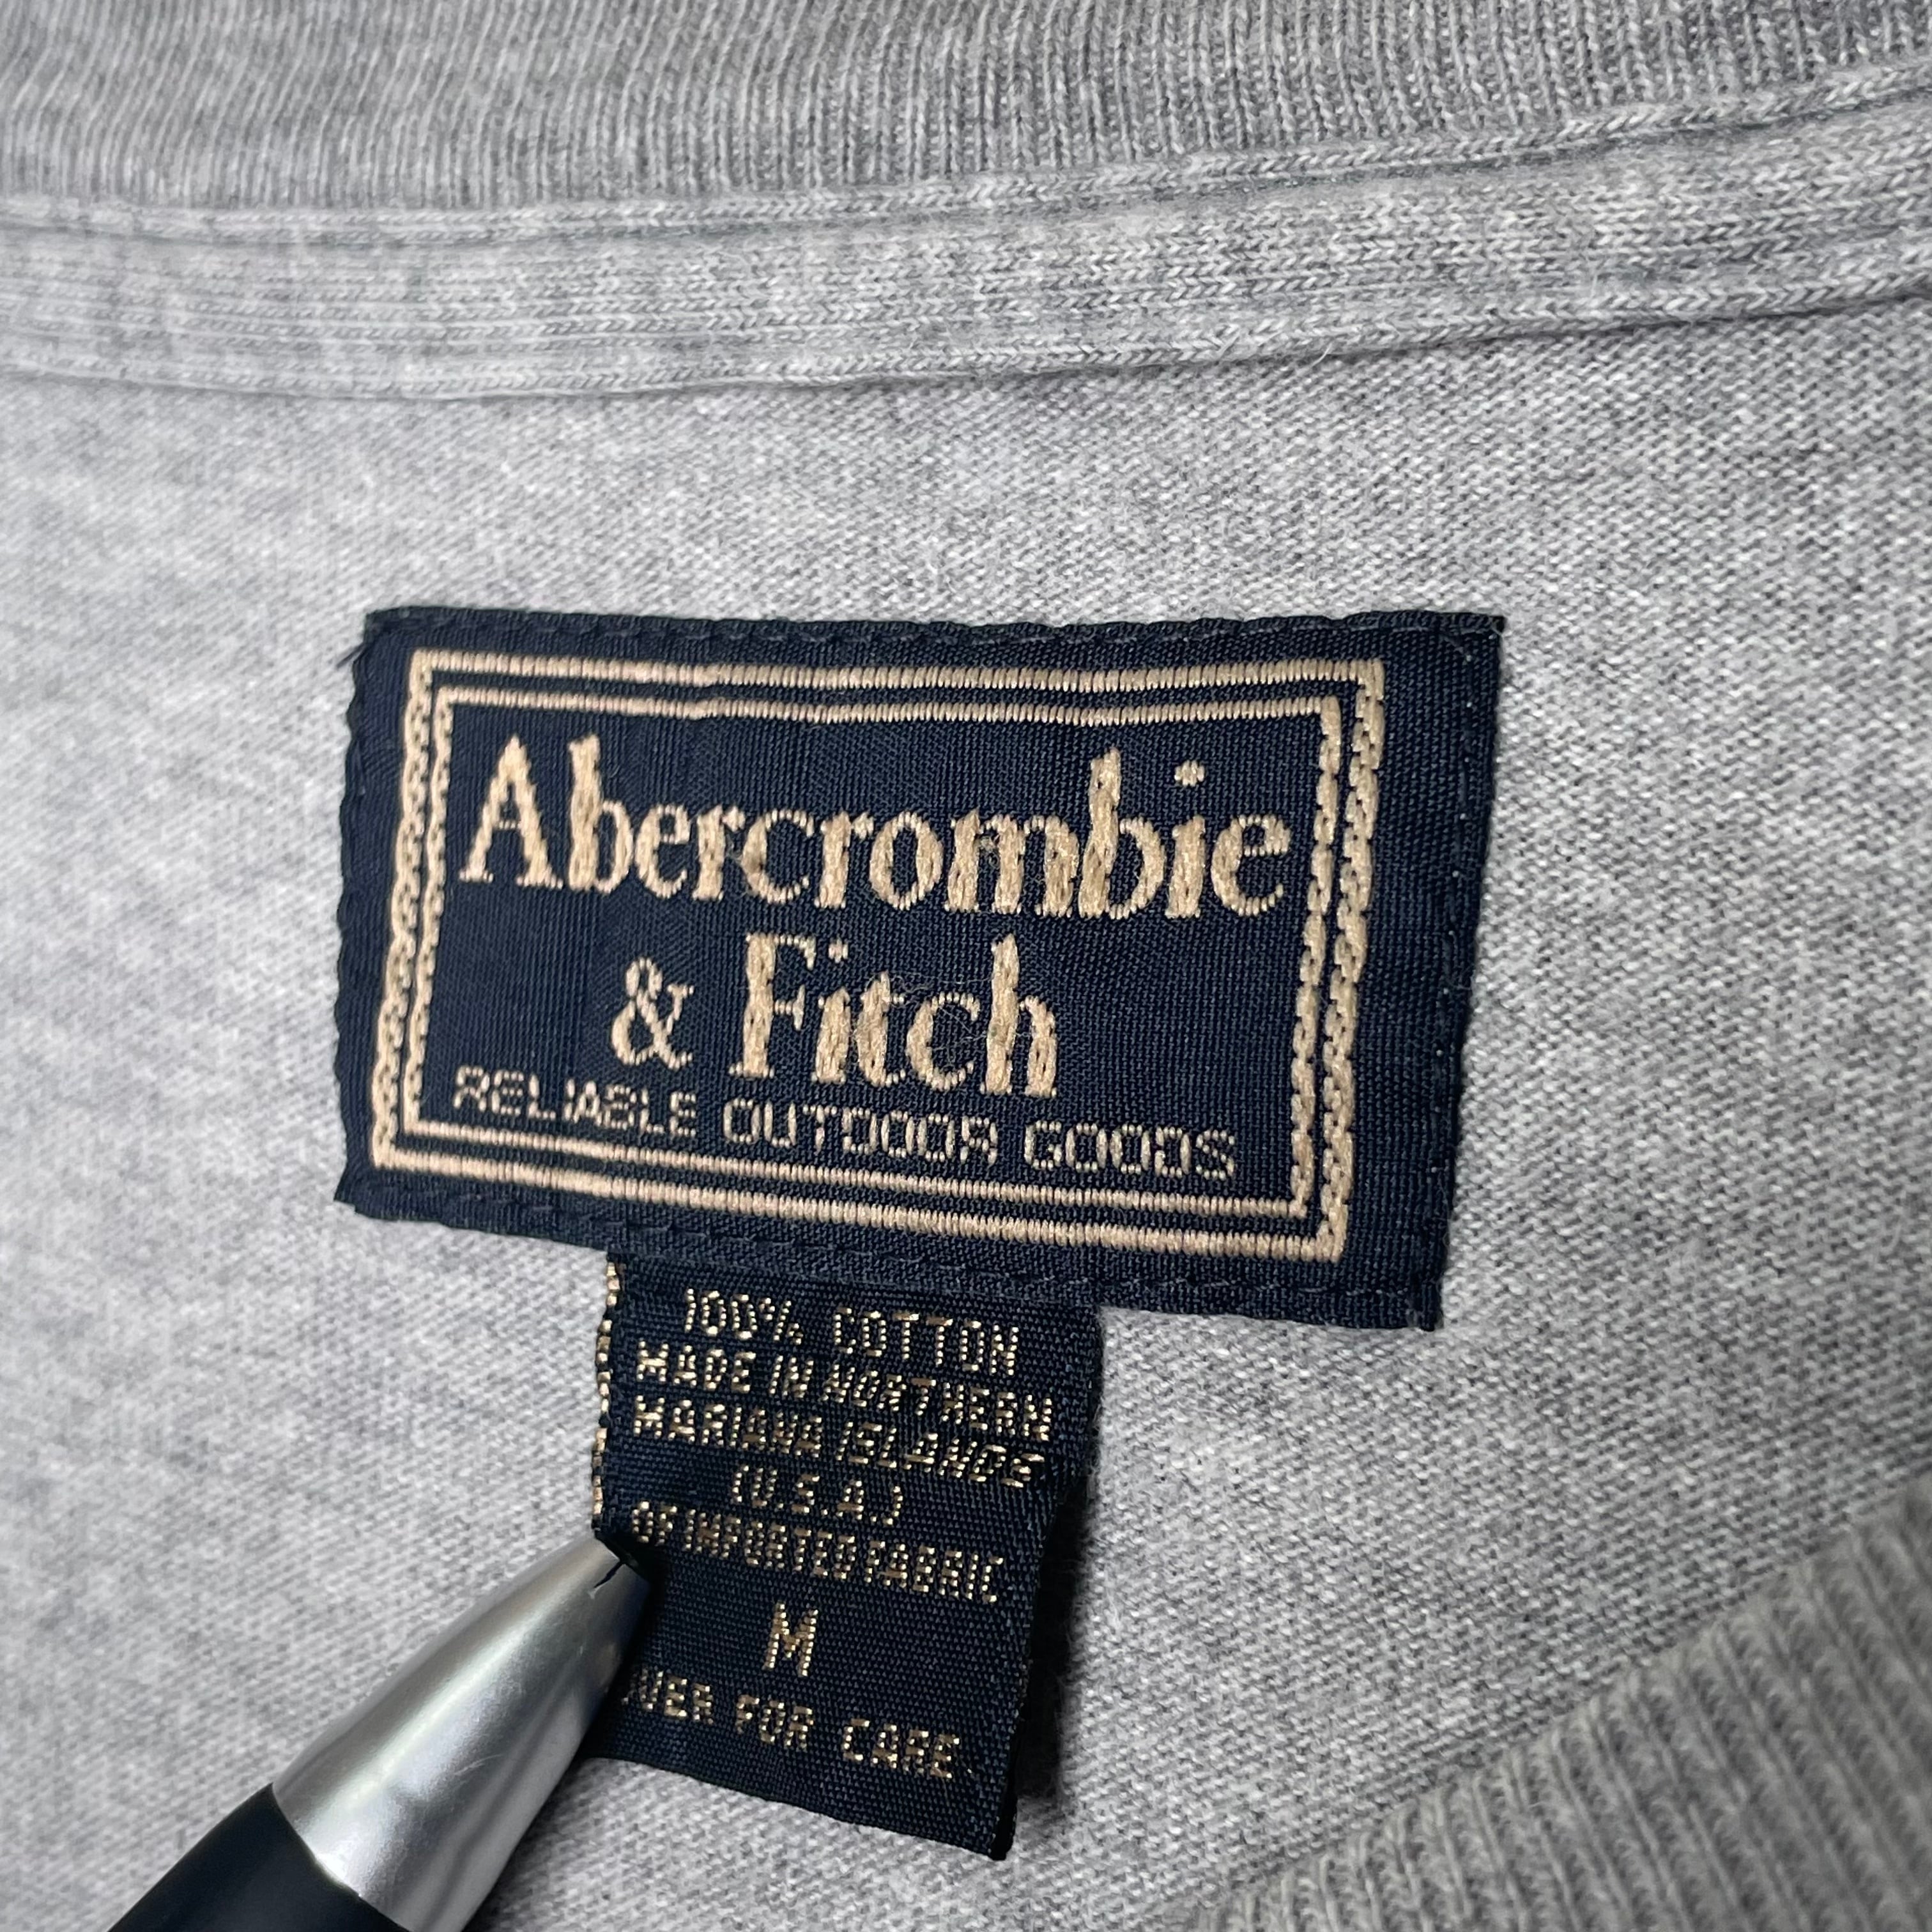 Abercrombie&Fitch A＆FITCH NYロゴ 長袖Tシャツ L